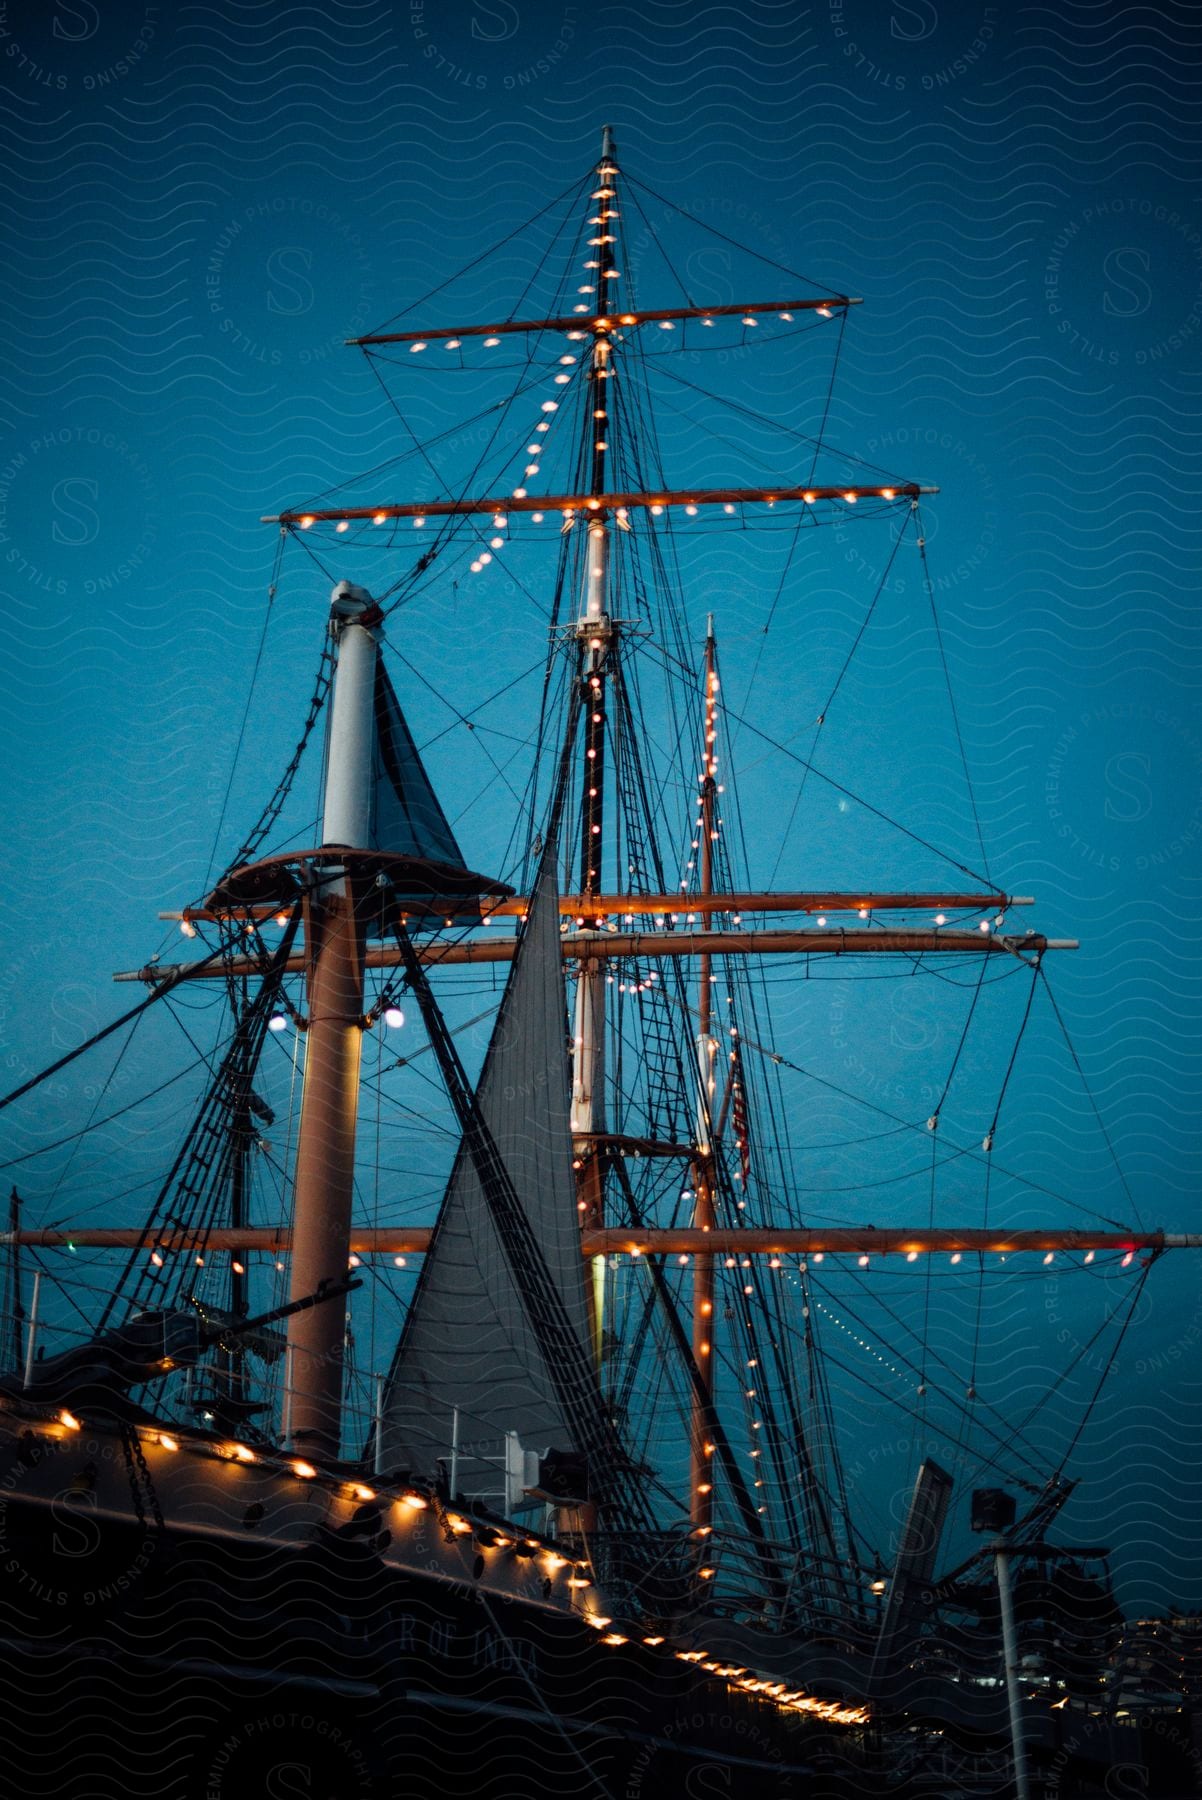 a sailing boat covered in small lights during dawn